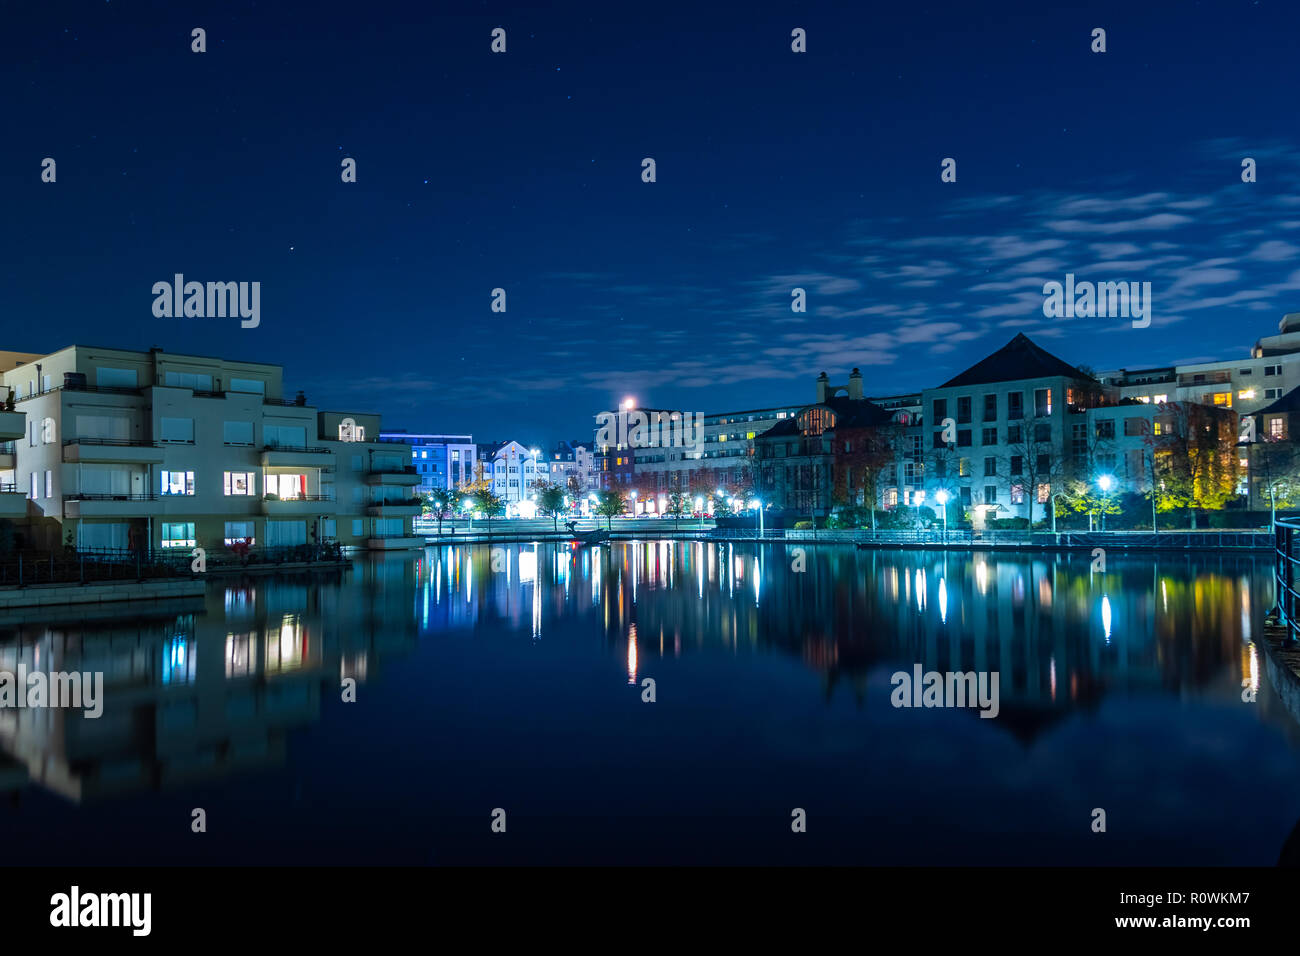 Humboldt Harbour at night with reflections on the water in Berlin Tegel Germany Stock Photo